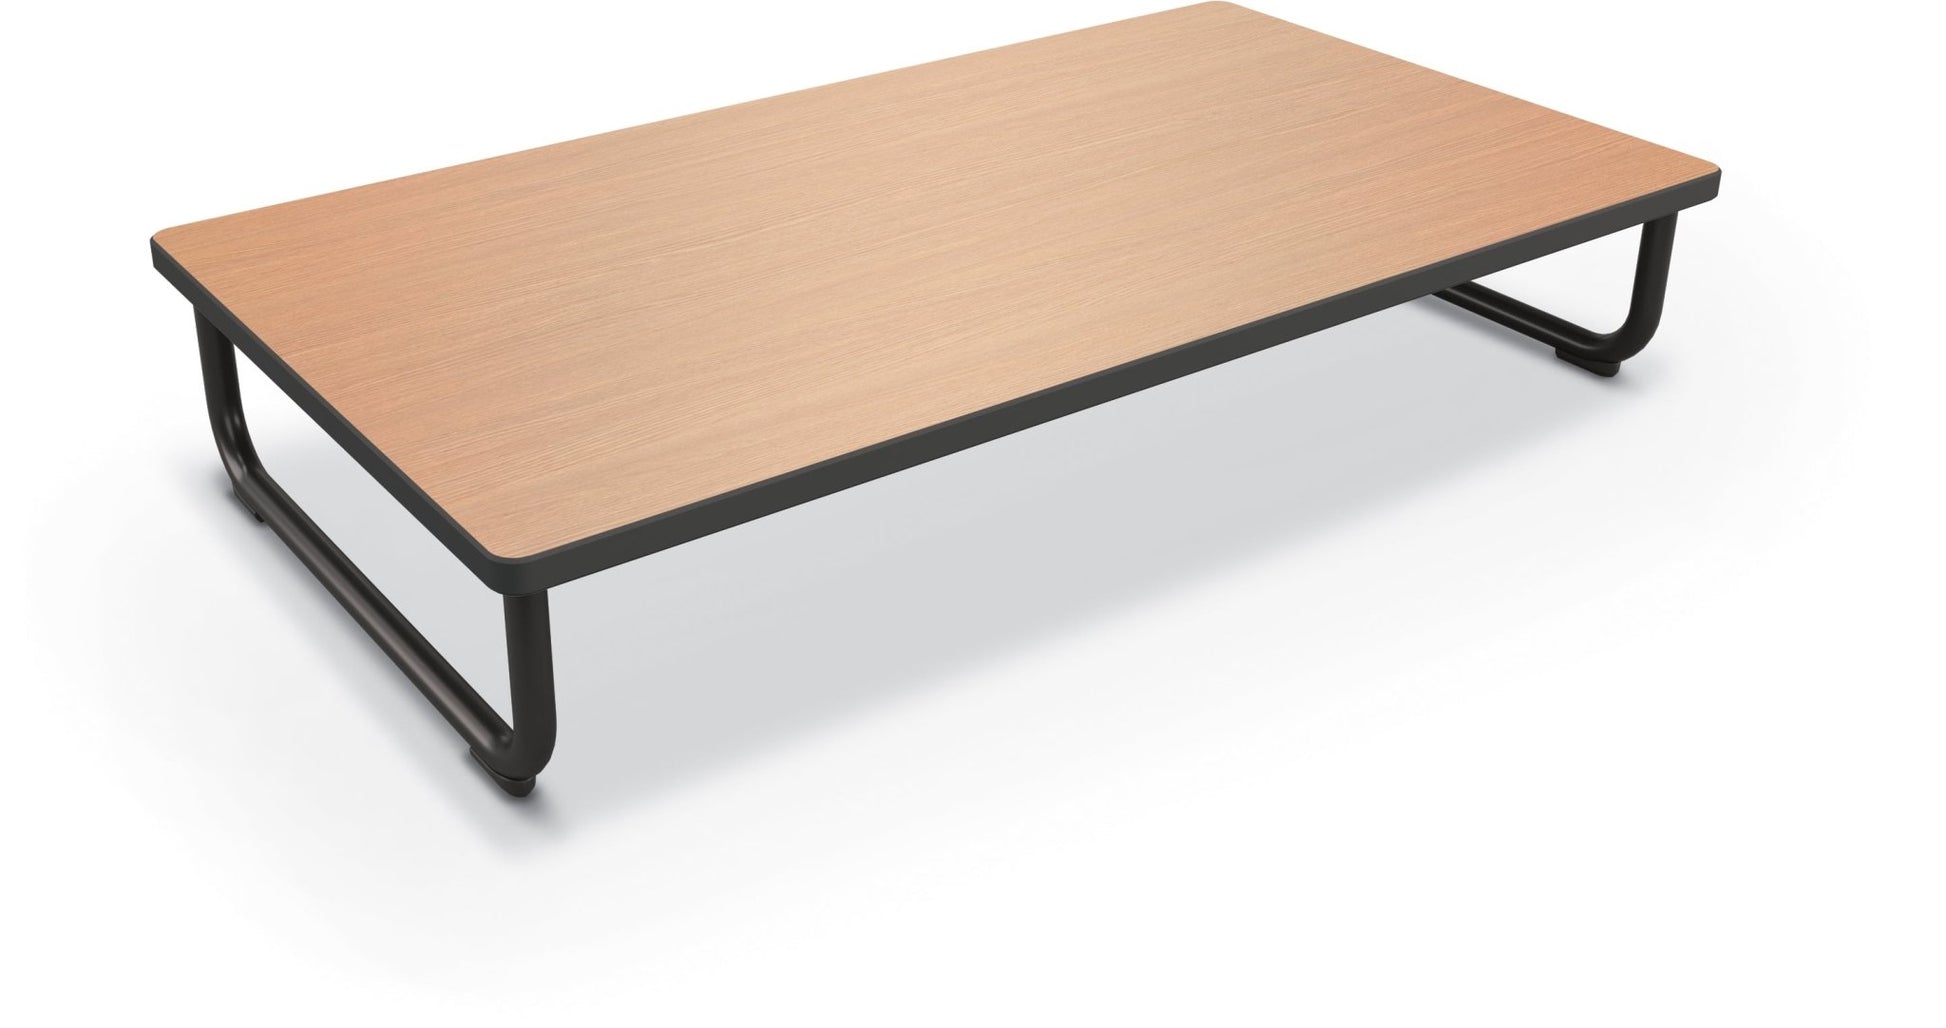 Mooreco Akt Lounge Loveseat Table - High-pressure Laminate (HPL) Top Surface - SchoolOutlet